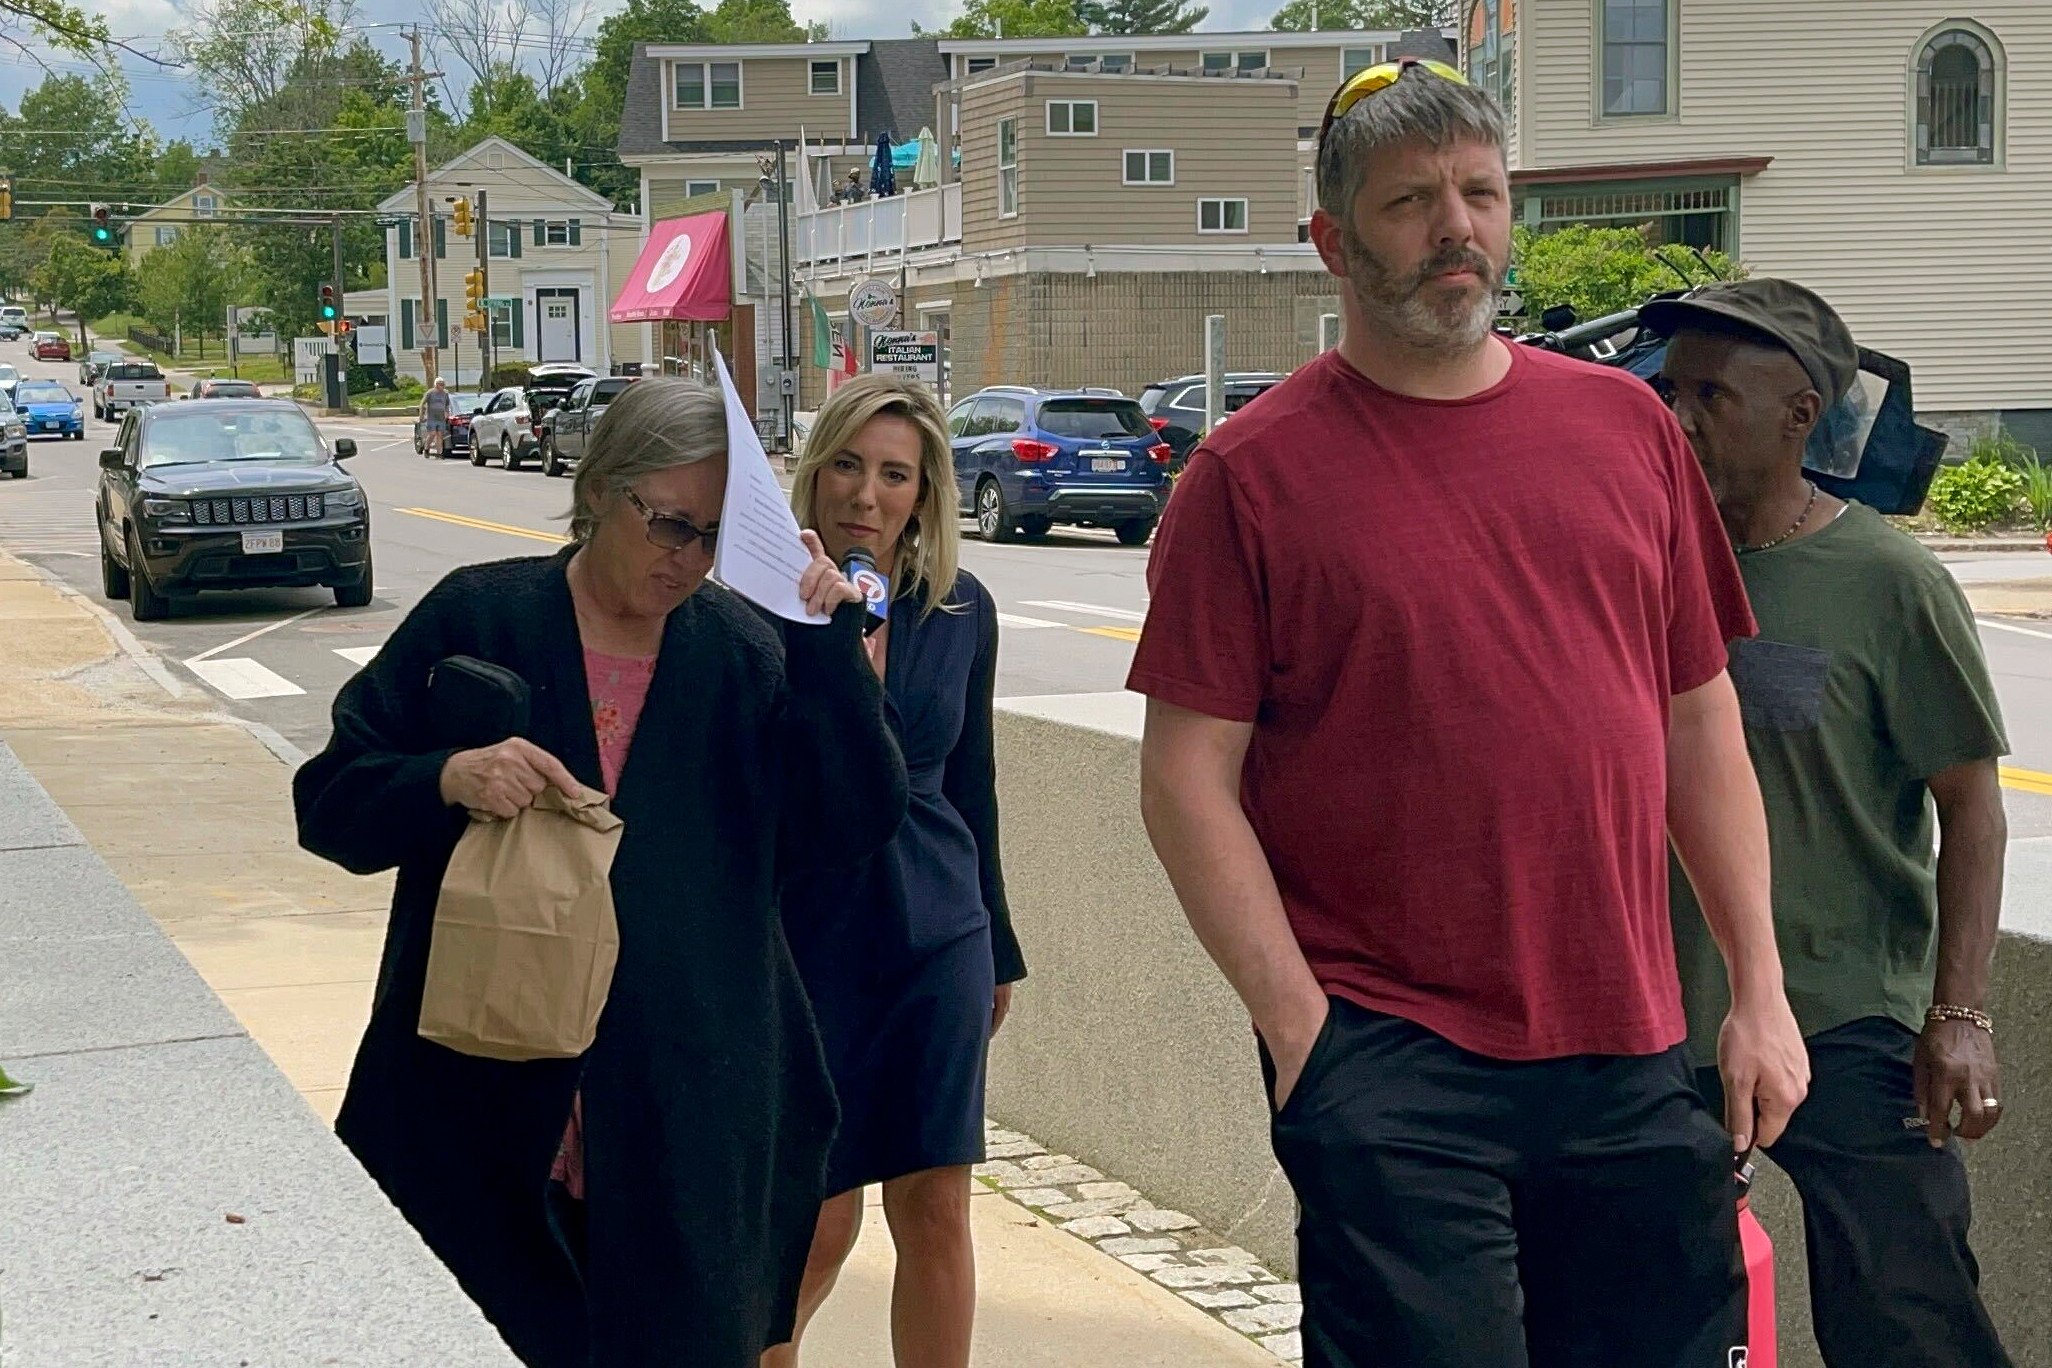 Denise Lodge, left, covers her face as she walks from the courthouse in Concord, New Hampshire on Wednesday following her arrest on charges related to an alleged scheme to steal and sell body parts. Photo: The Boston Globe via AP